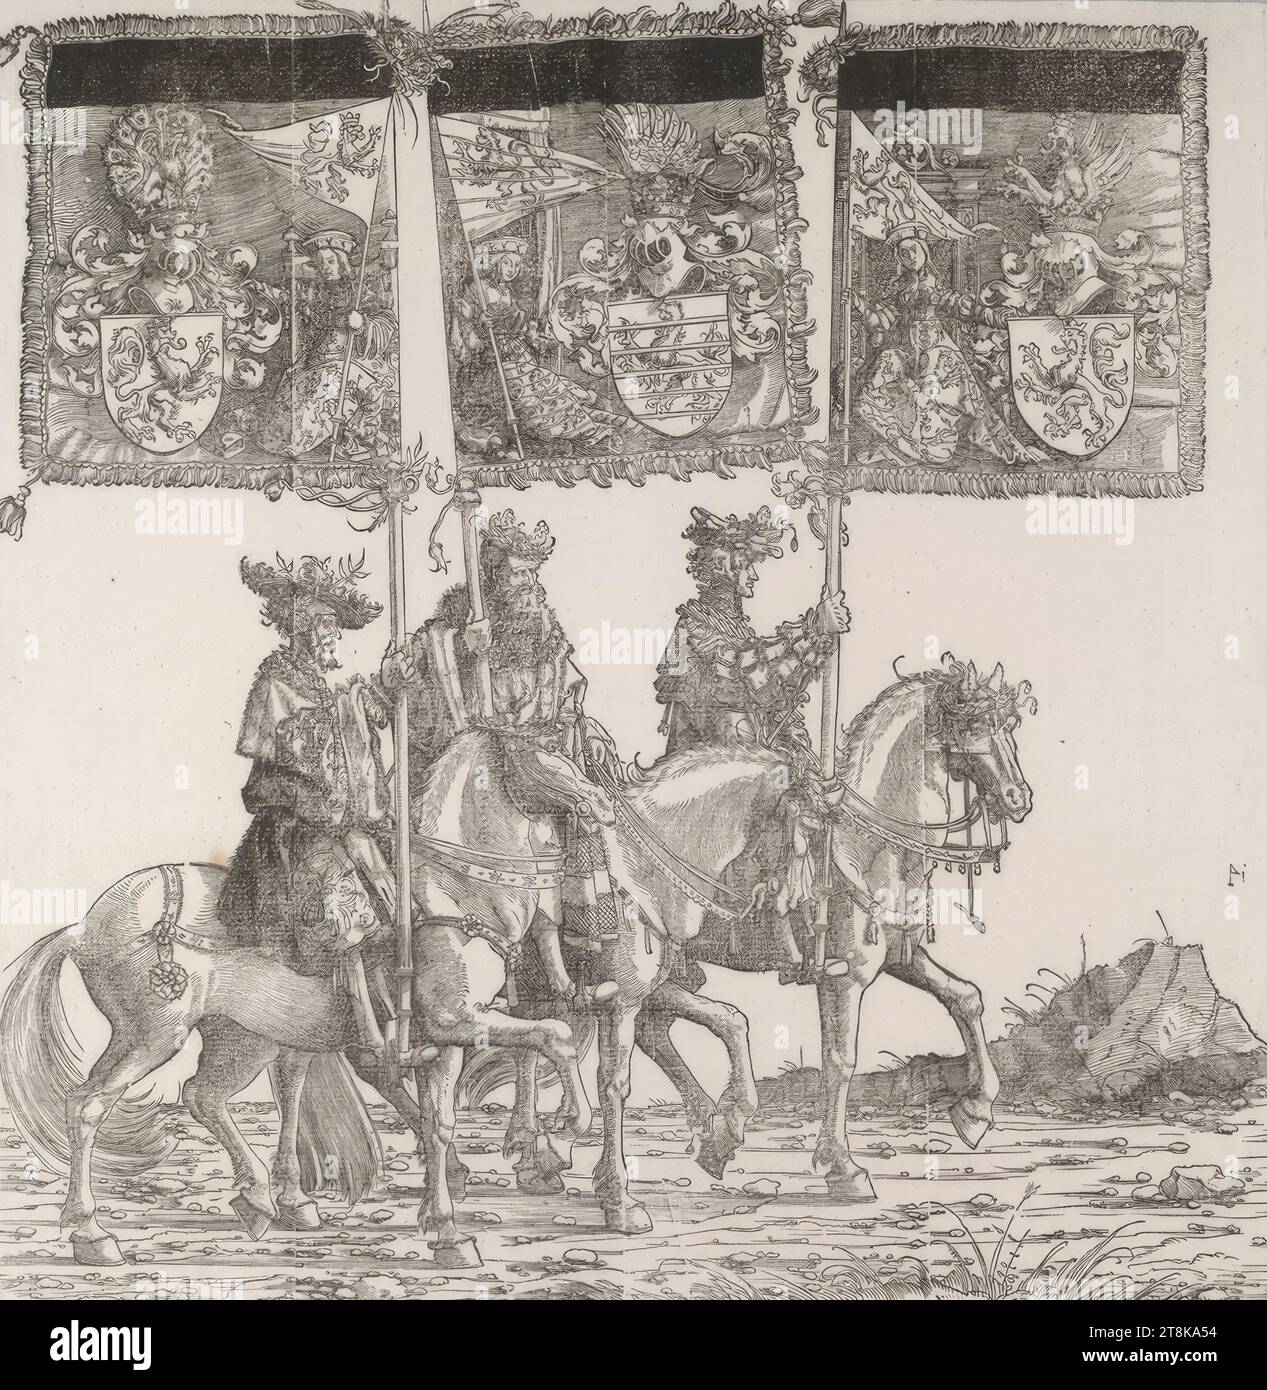 Triumphal Procession of Emperor Maximilian I: Banner of Geldern, Luxembourg and Limburg, Triumphal Procession of Emperor Maximilian I, Albrecht Altdorfer, Germany, 1480 - 1538, 1796, first edition 1526, print, woodcut Stock Photo